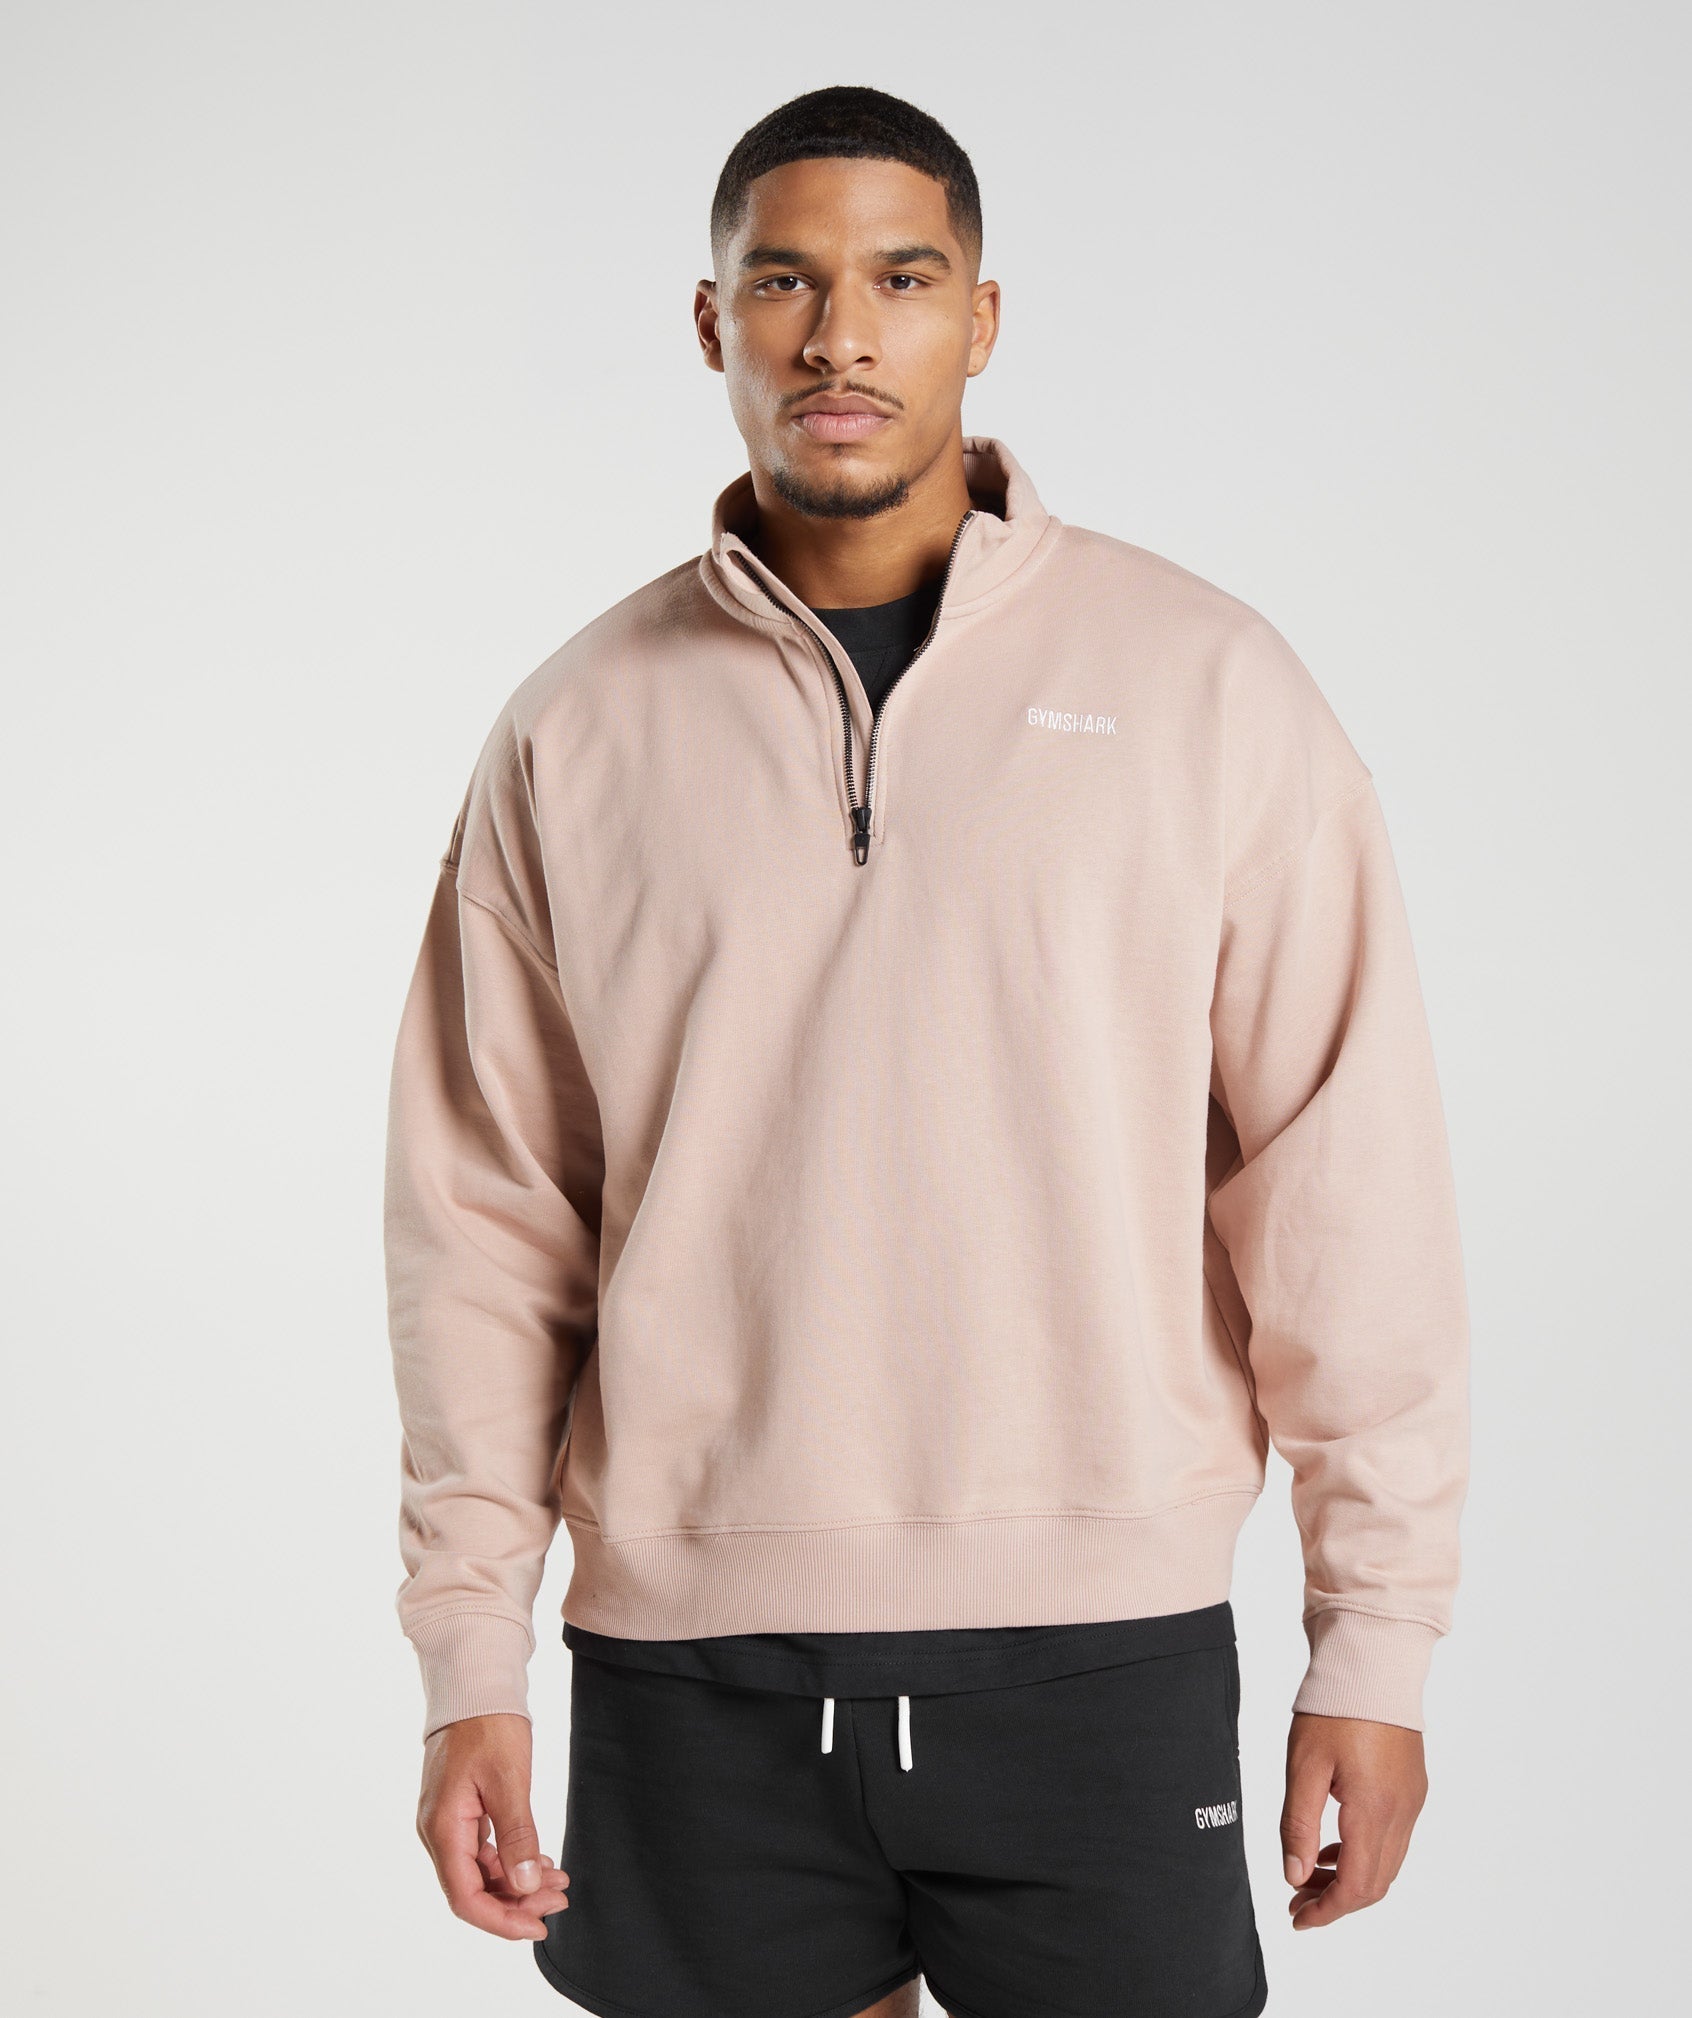 Rest Day Sweats 1/4 Zip in Dusty Taupe - view 2